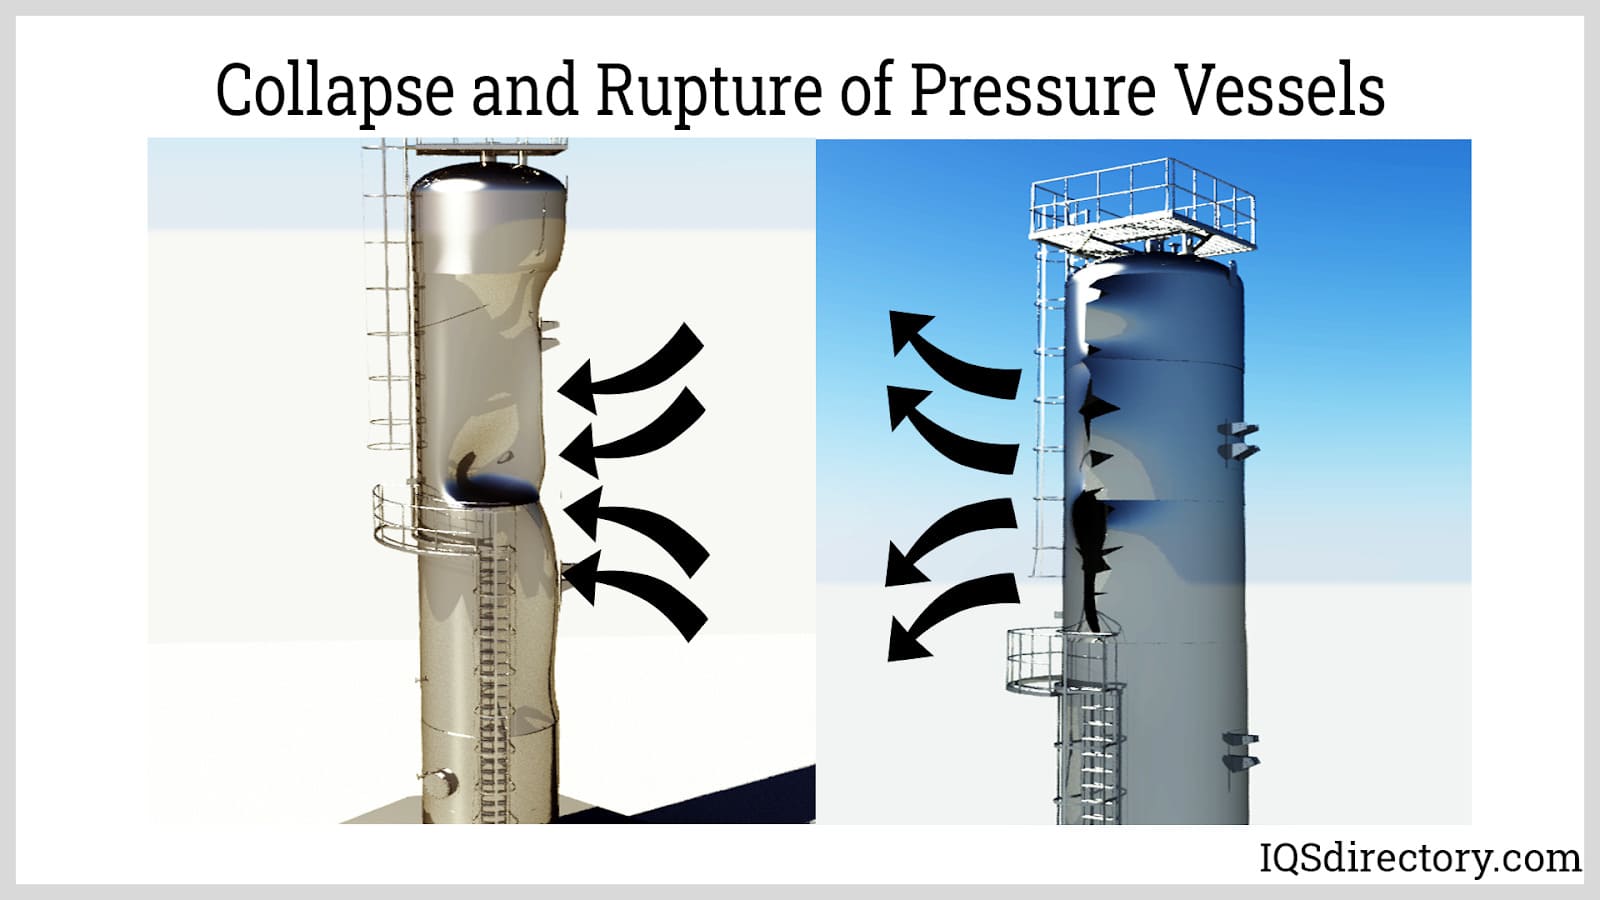 Collapse and Rapture of Pressure Vessels